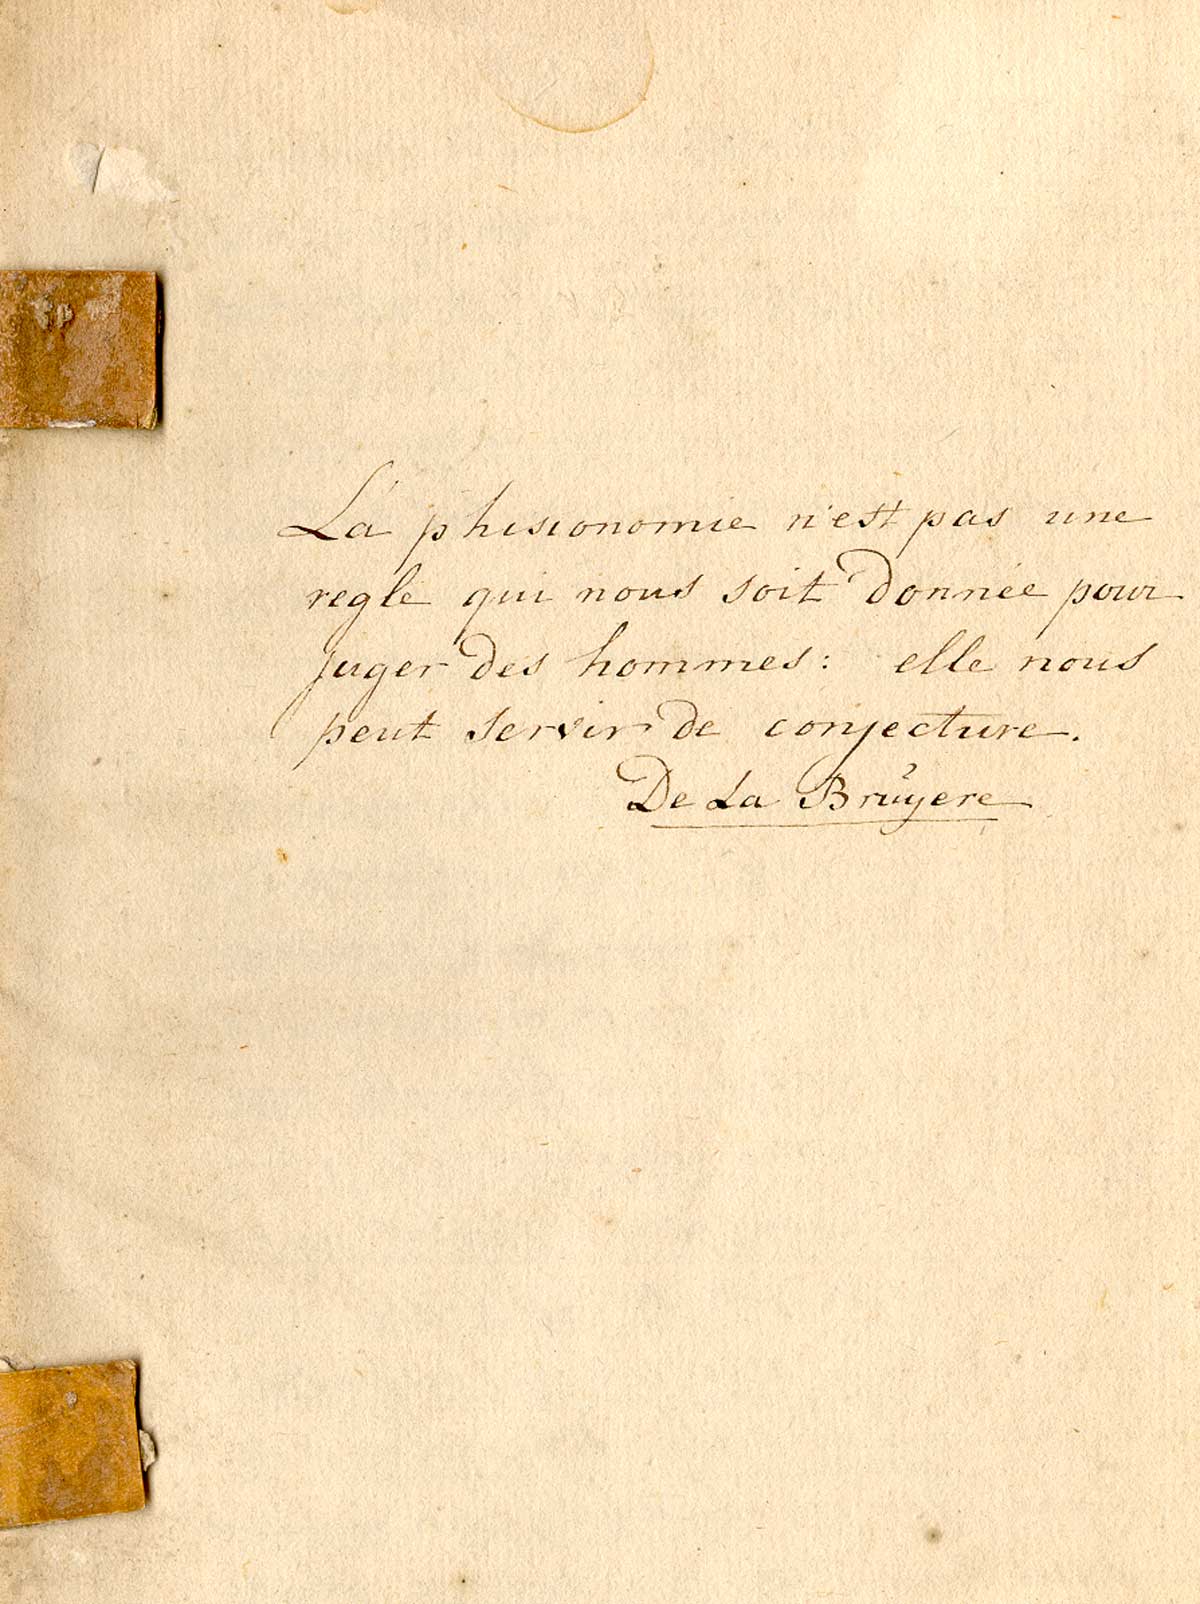 Manuscript title page in Dutch of Anonymous treatise on physiognomy, NLM call no.: MS B 662.